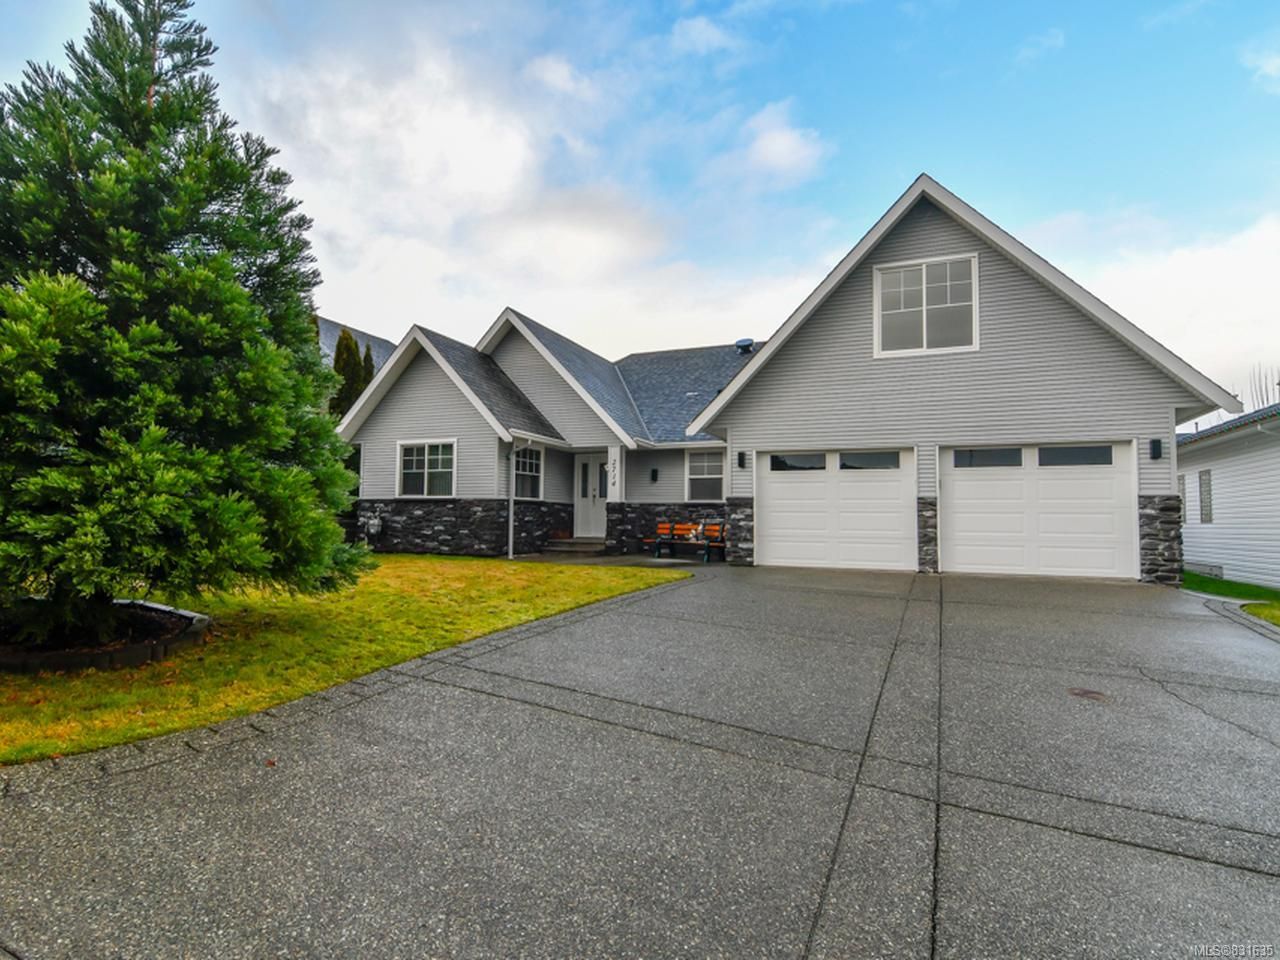 Main Photo: 2714 Eden St in CAMPBELL RIVER: CR Willow Point House for sale (Campbell River)  : MLS®# 831635